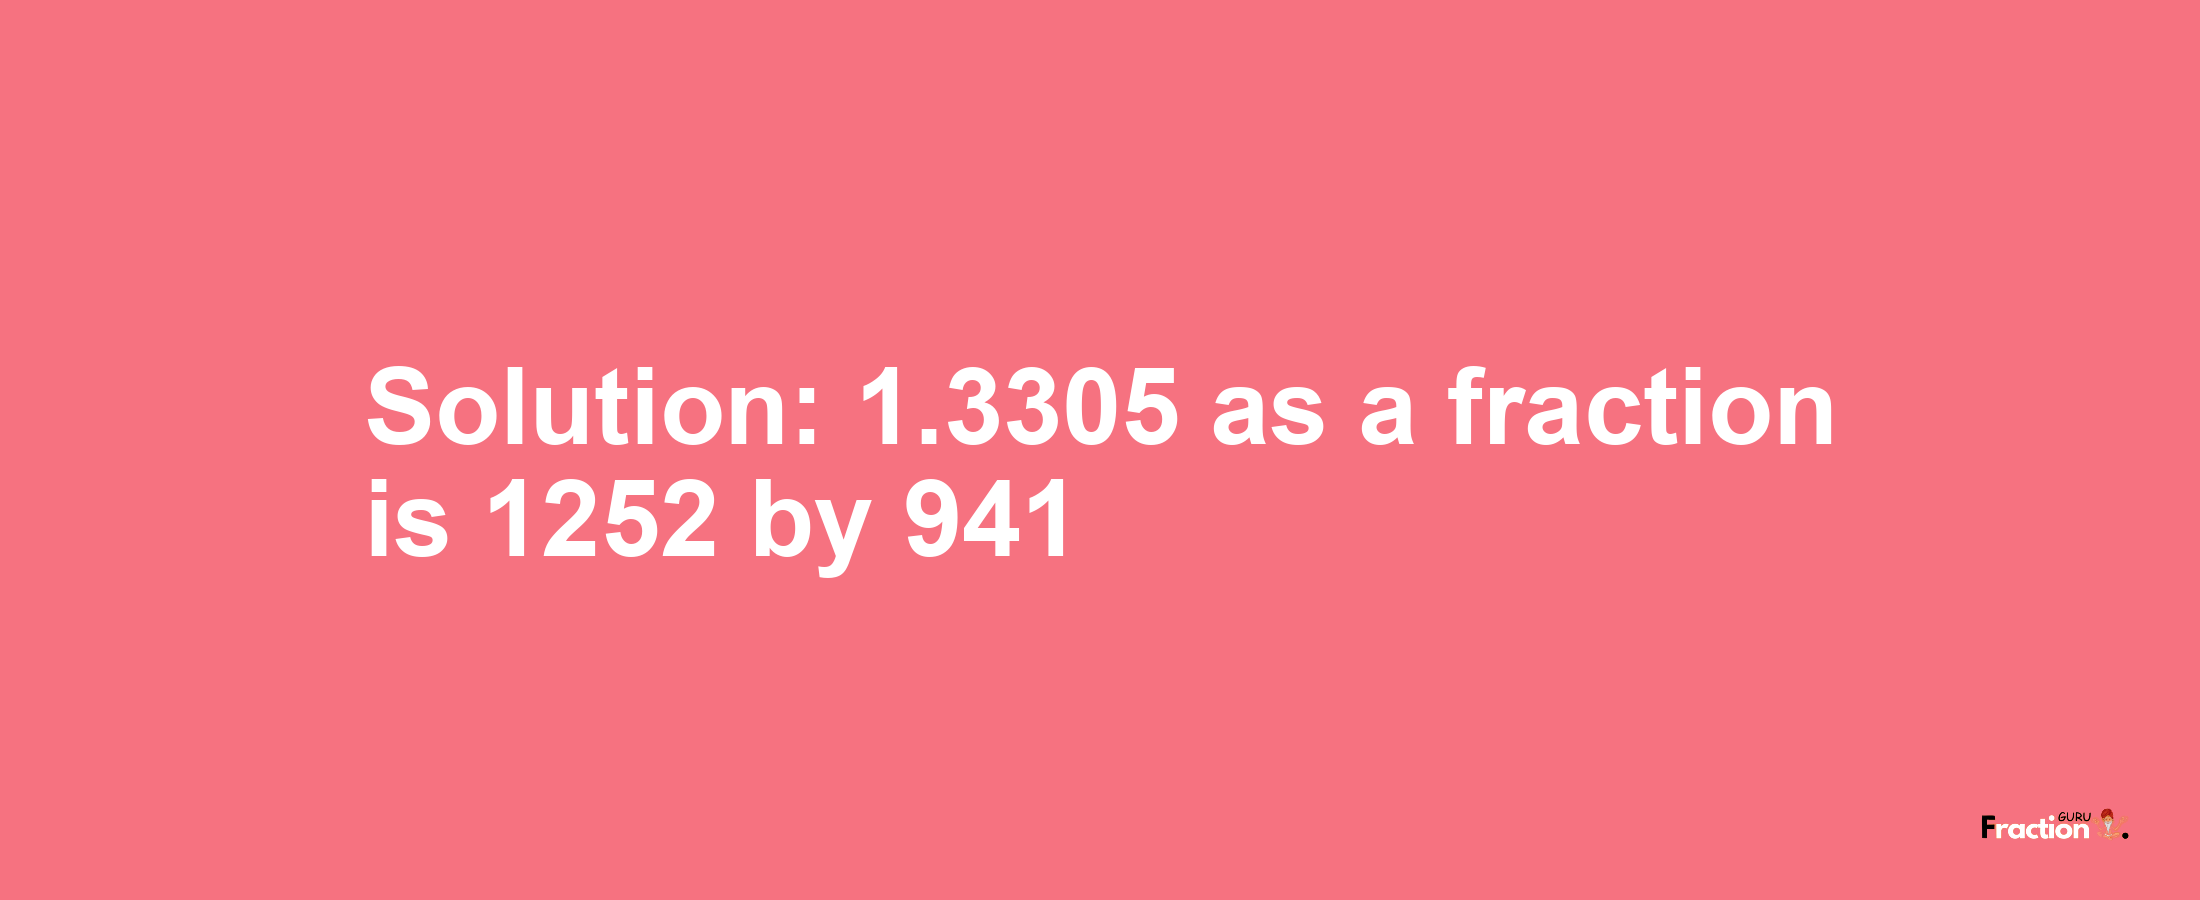 Solution:1.3305 as a fraction is 1252/941